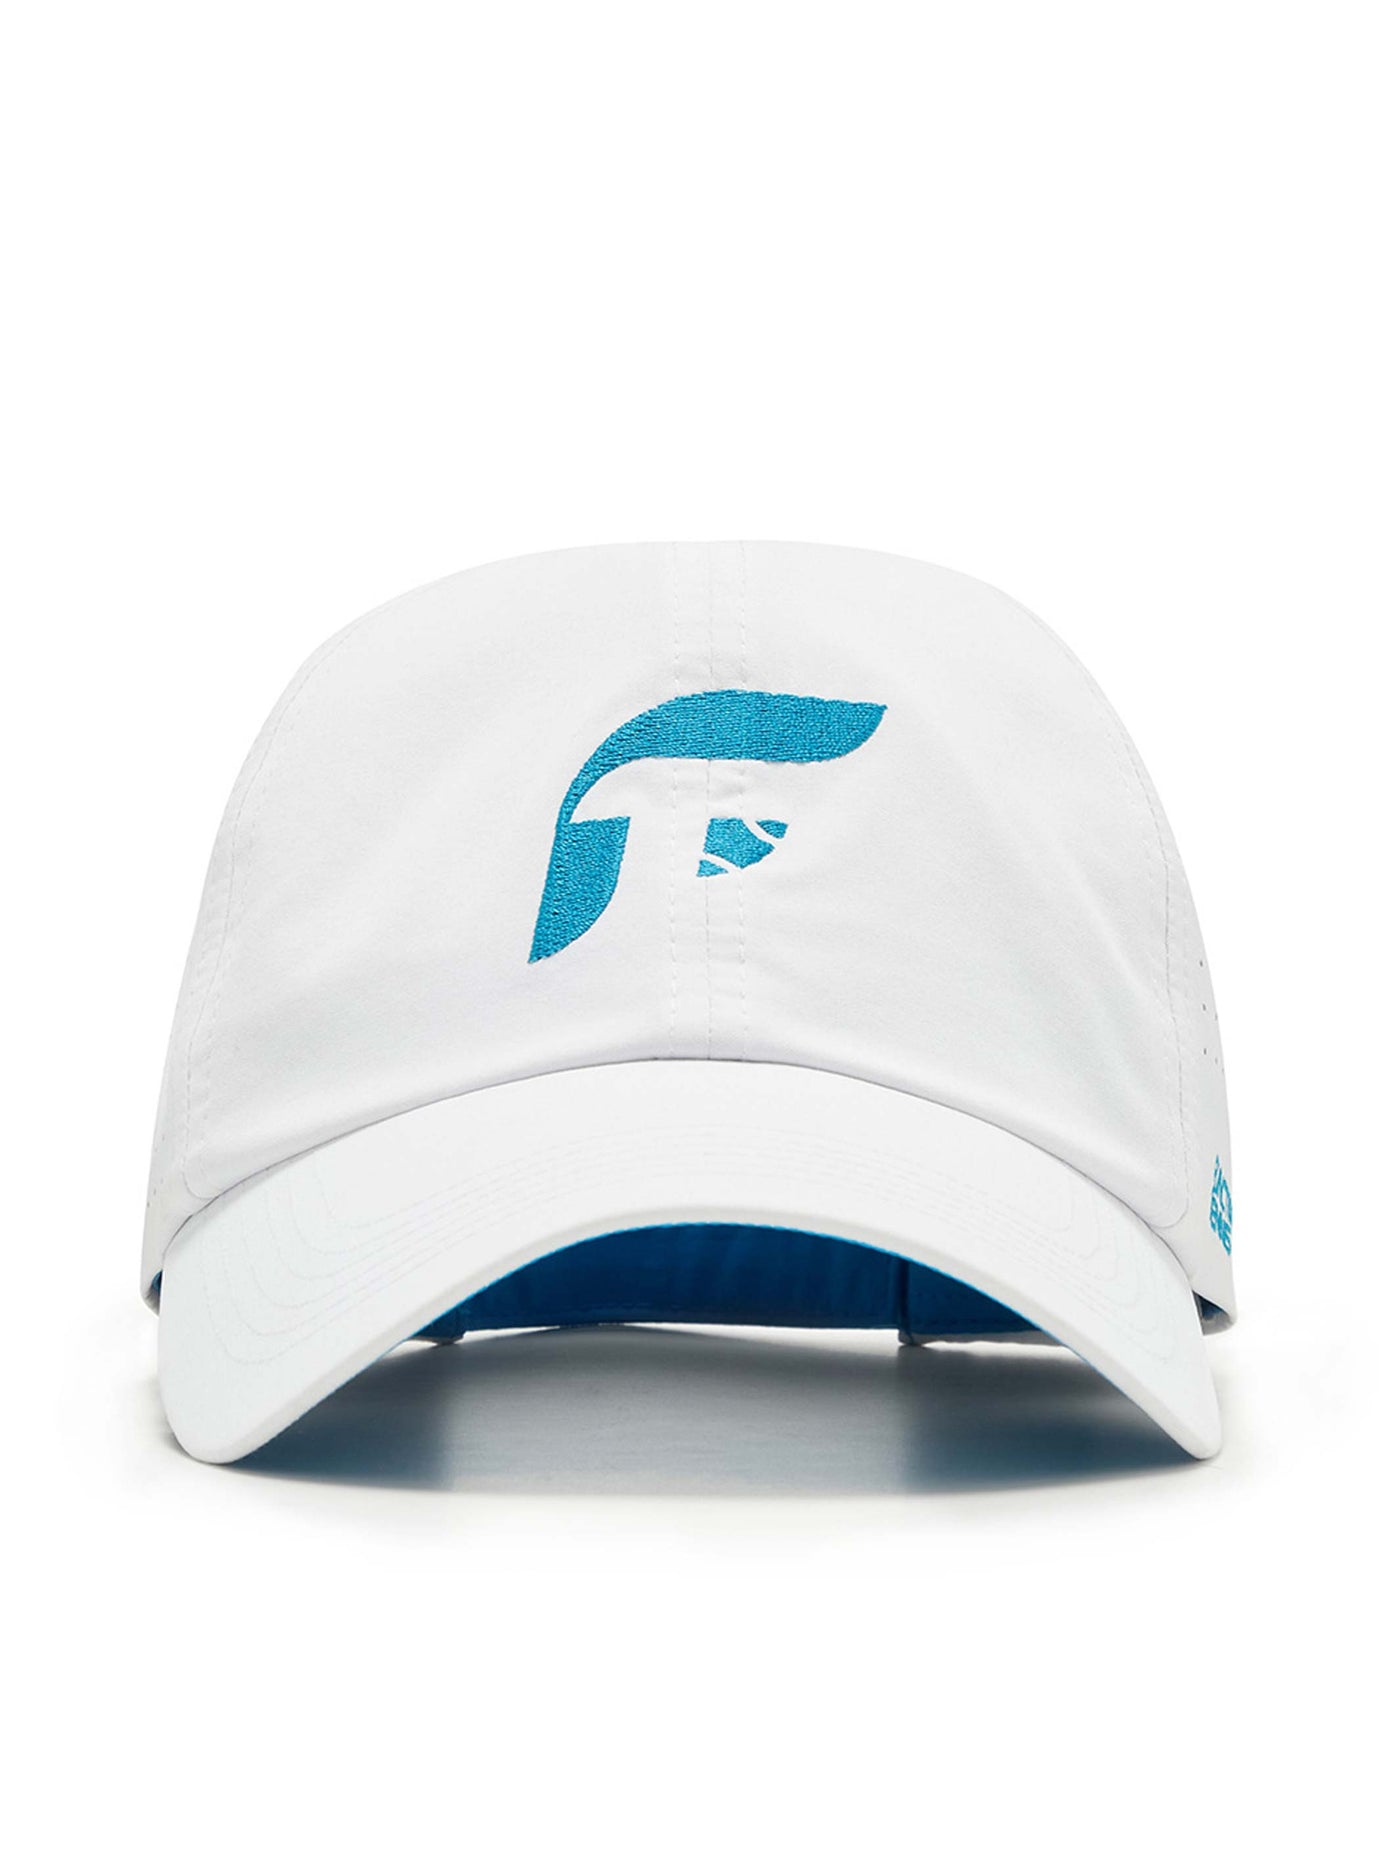 The On-Court Hat